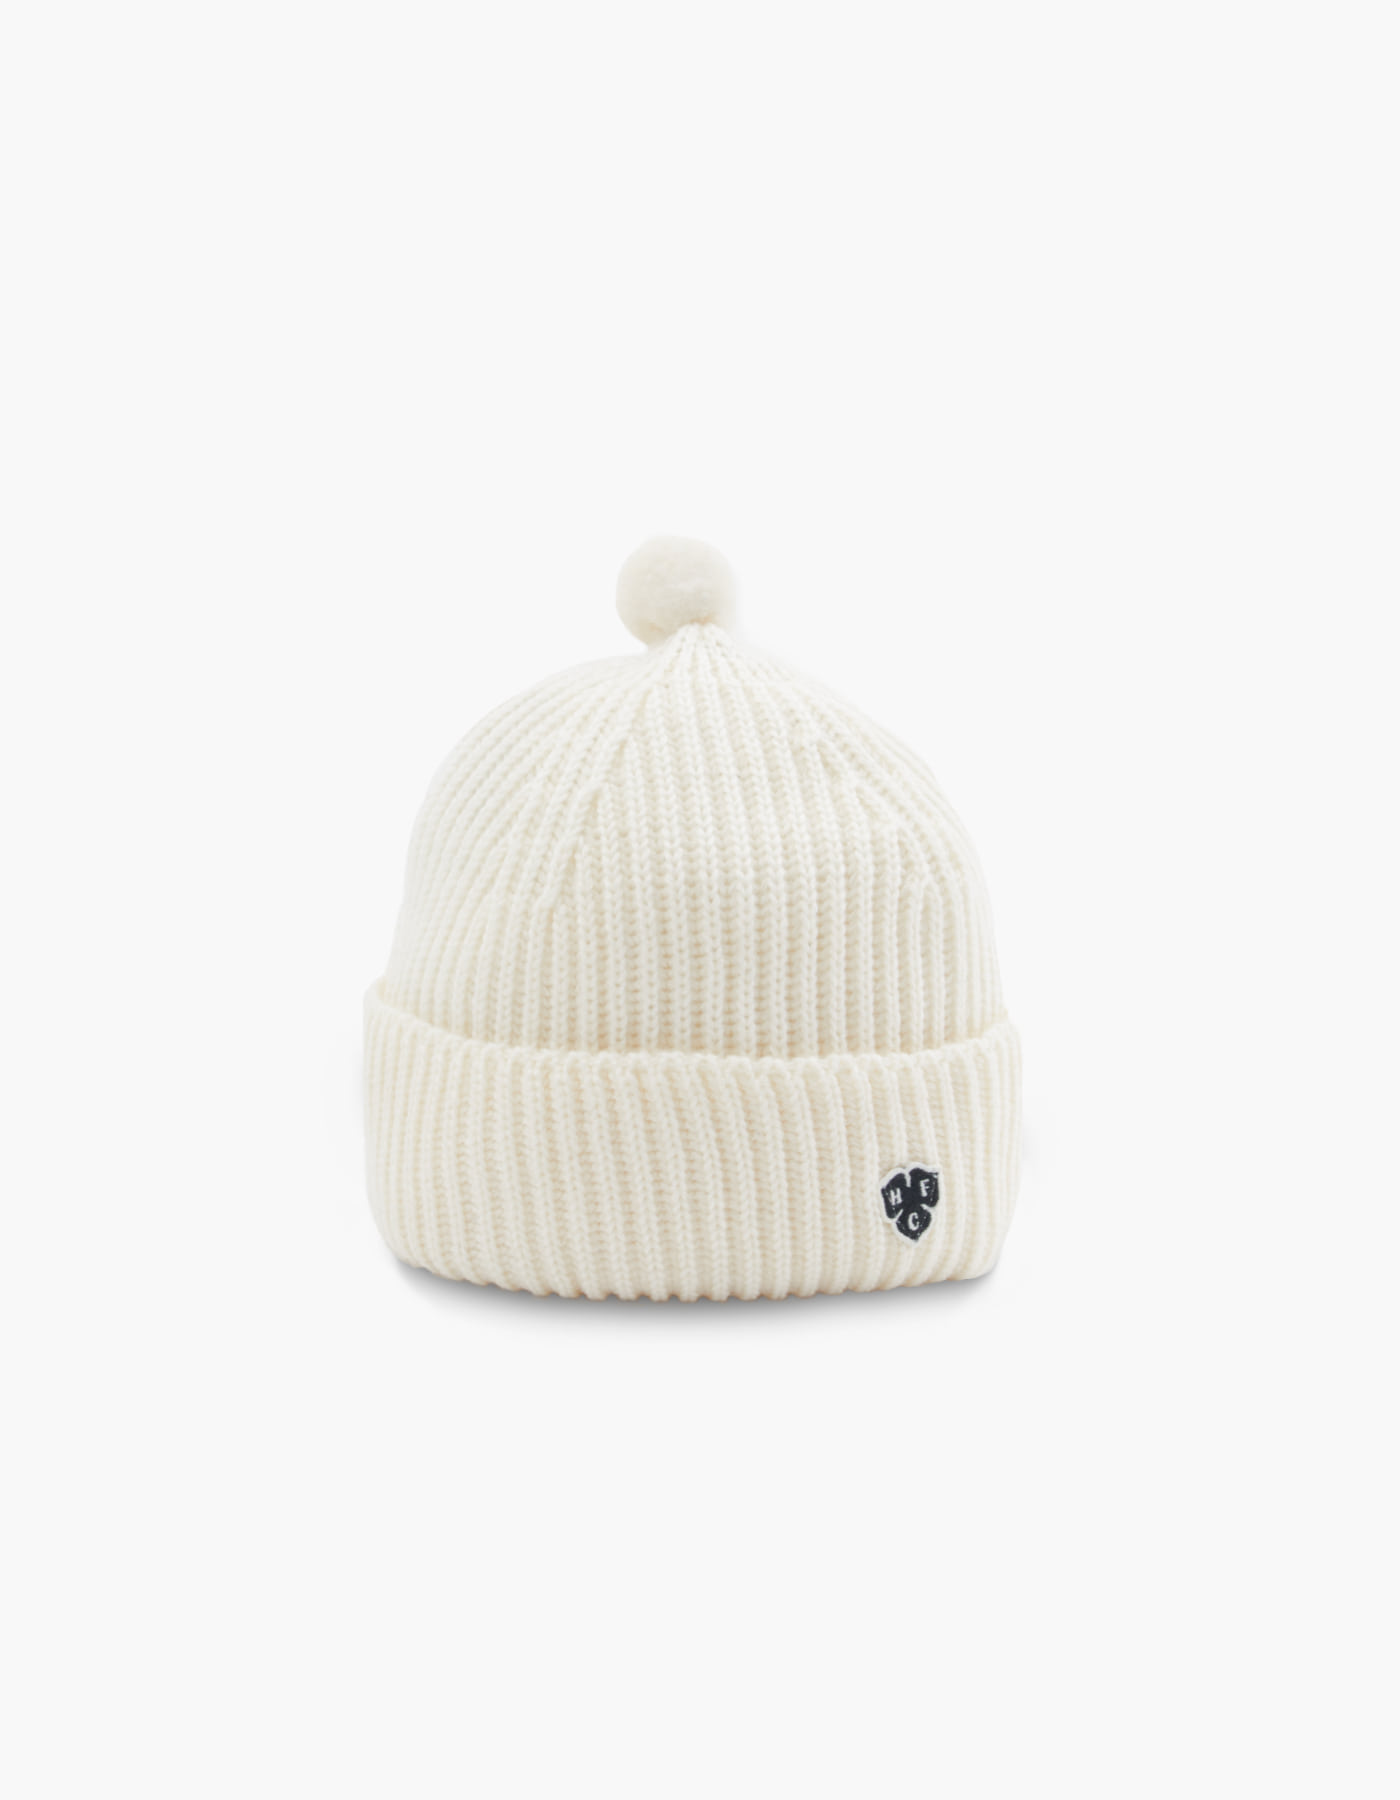 HFC CLOVER WOOL BOBBLE WATCH CAP / OFF WHITE